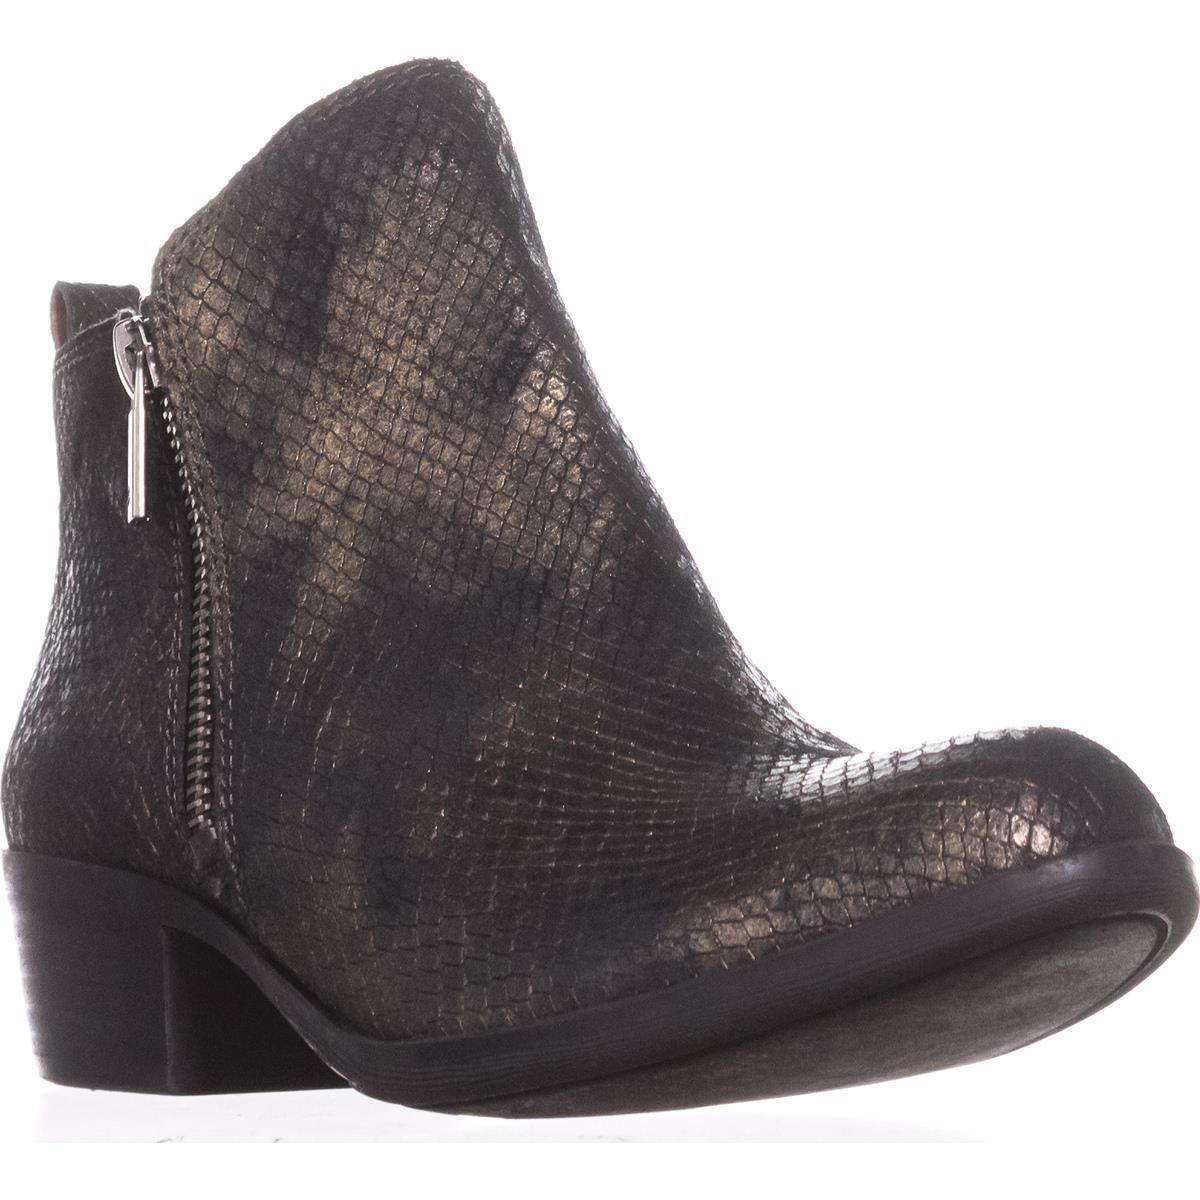 lucky brand ankle boots